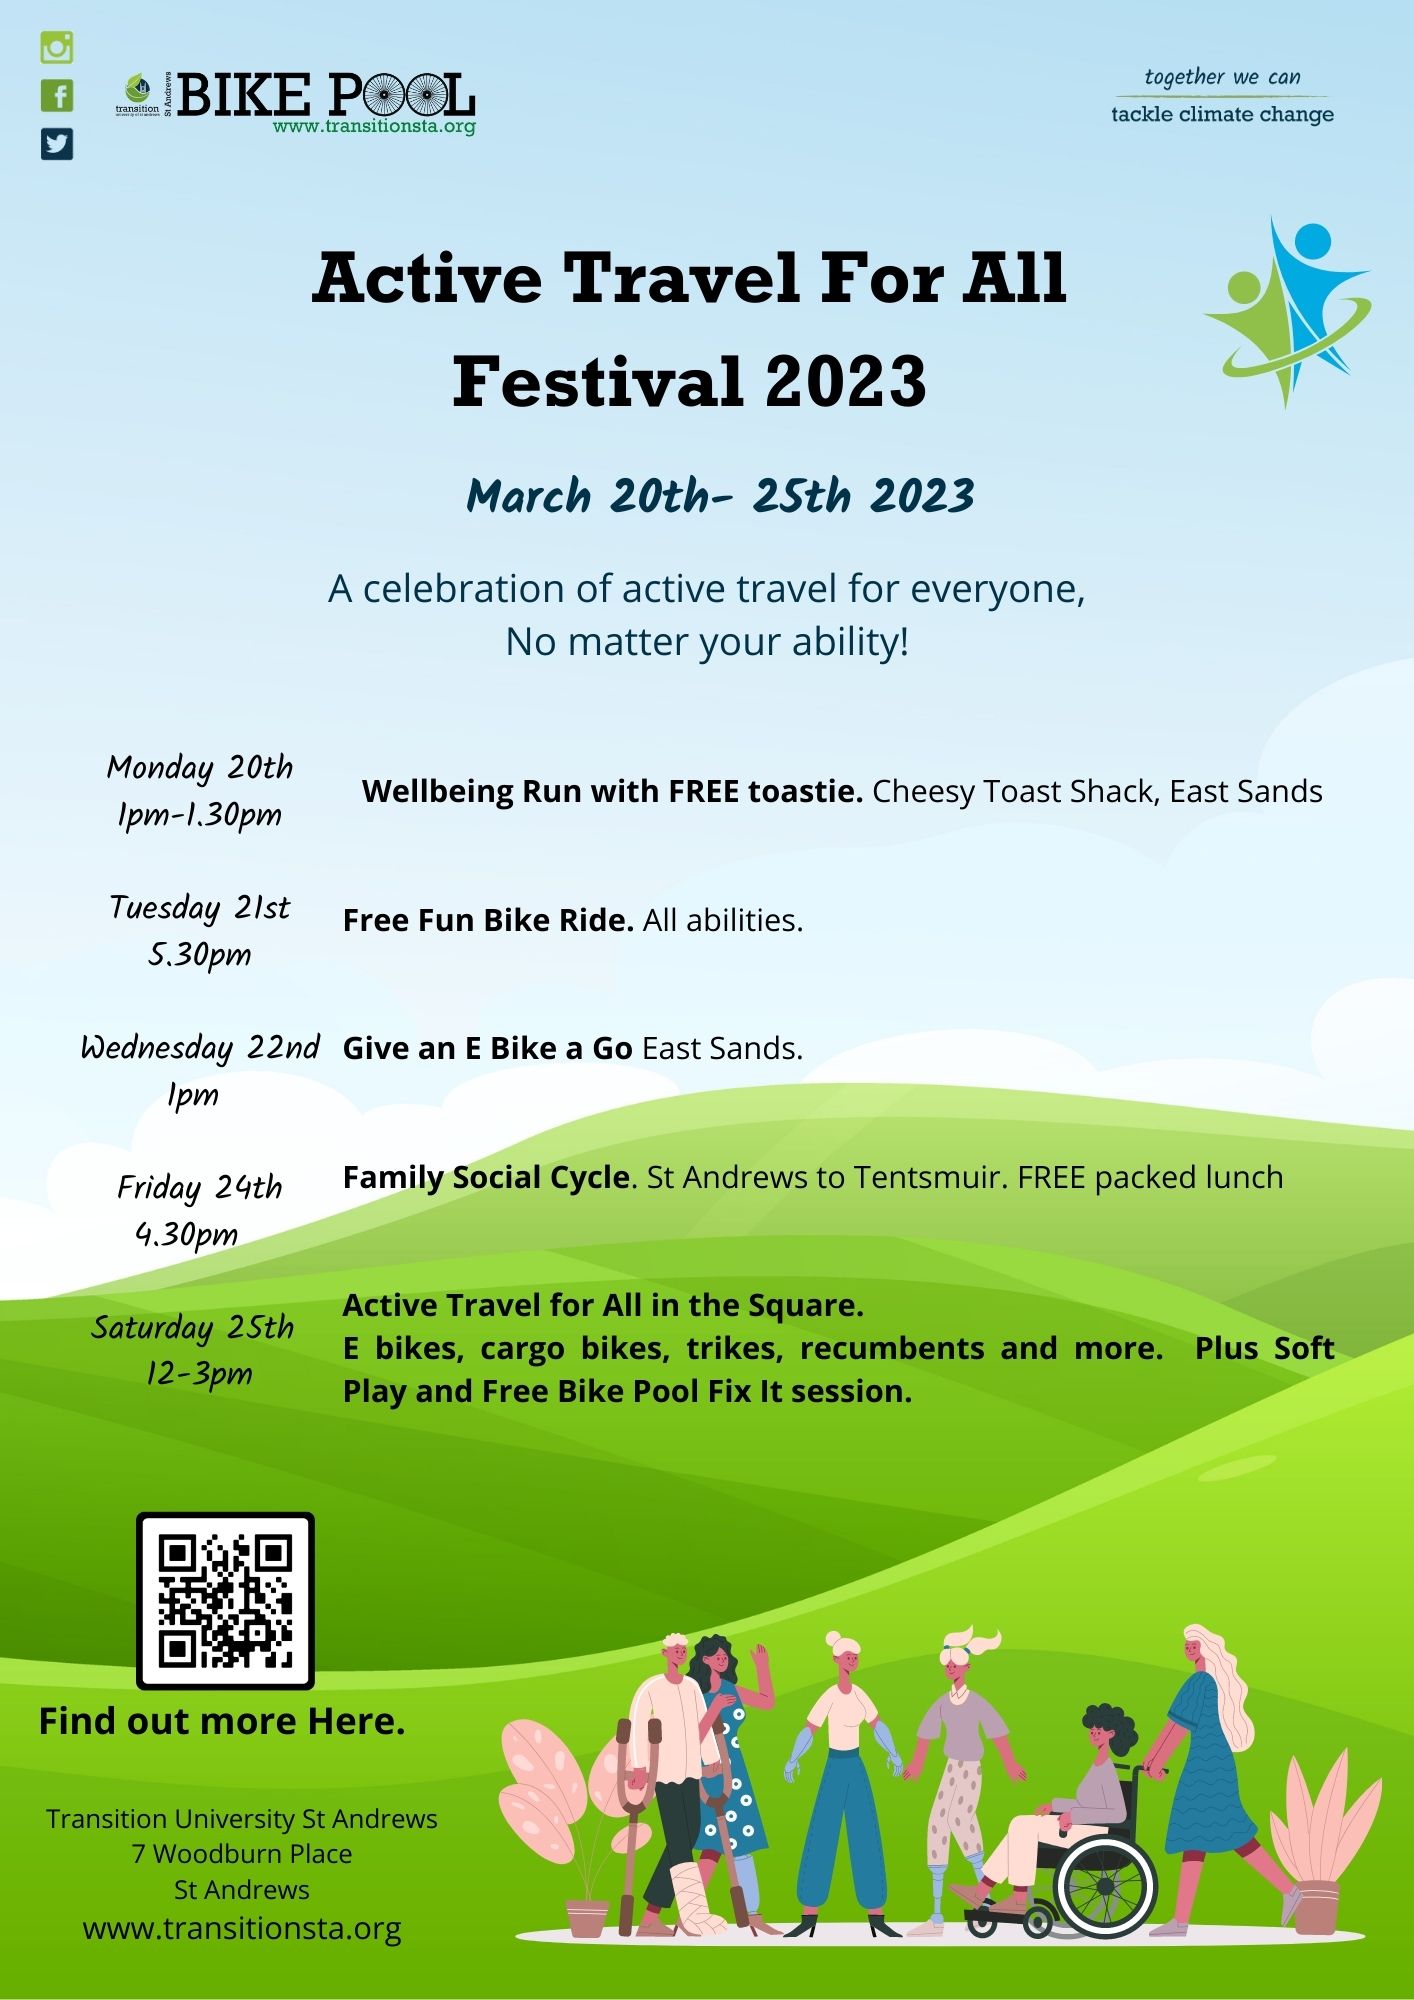 Active Travel Fest events in St Andrews w/c 20 March